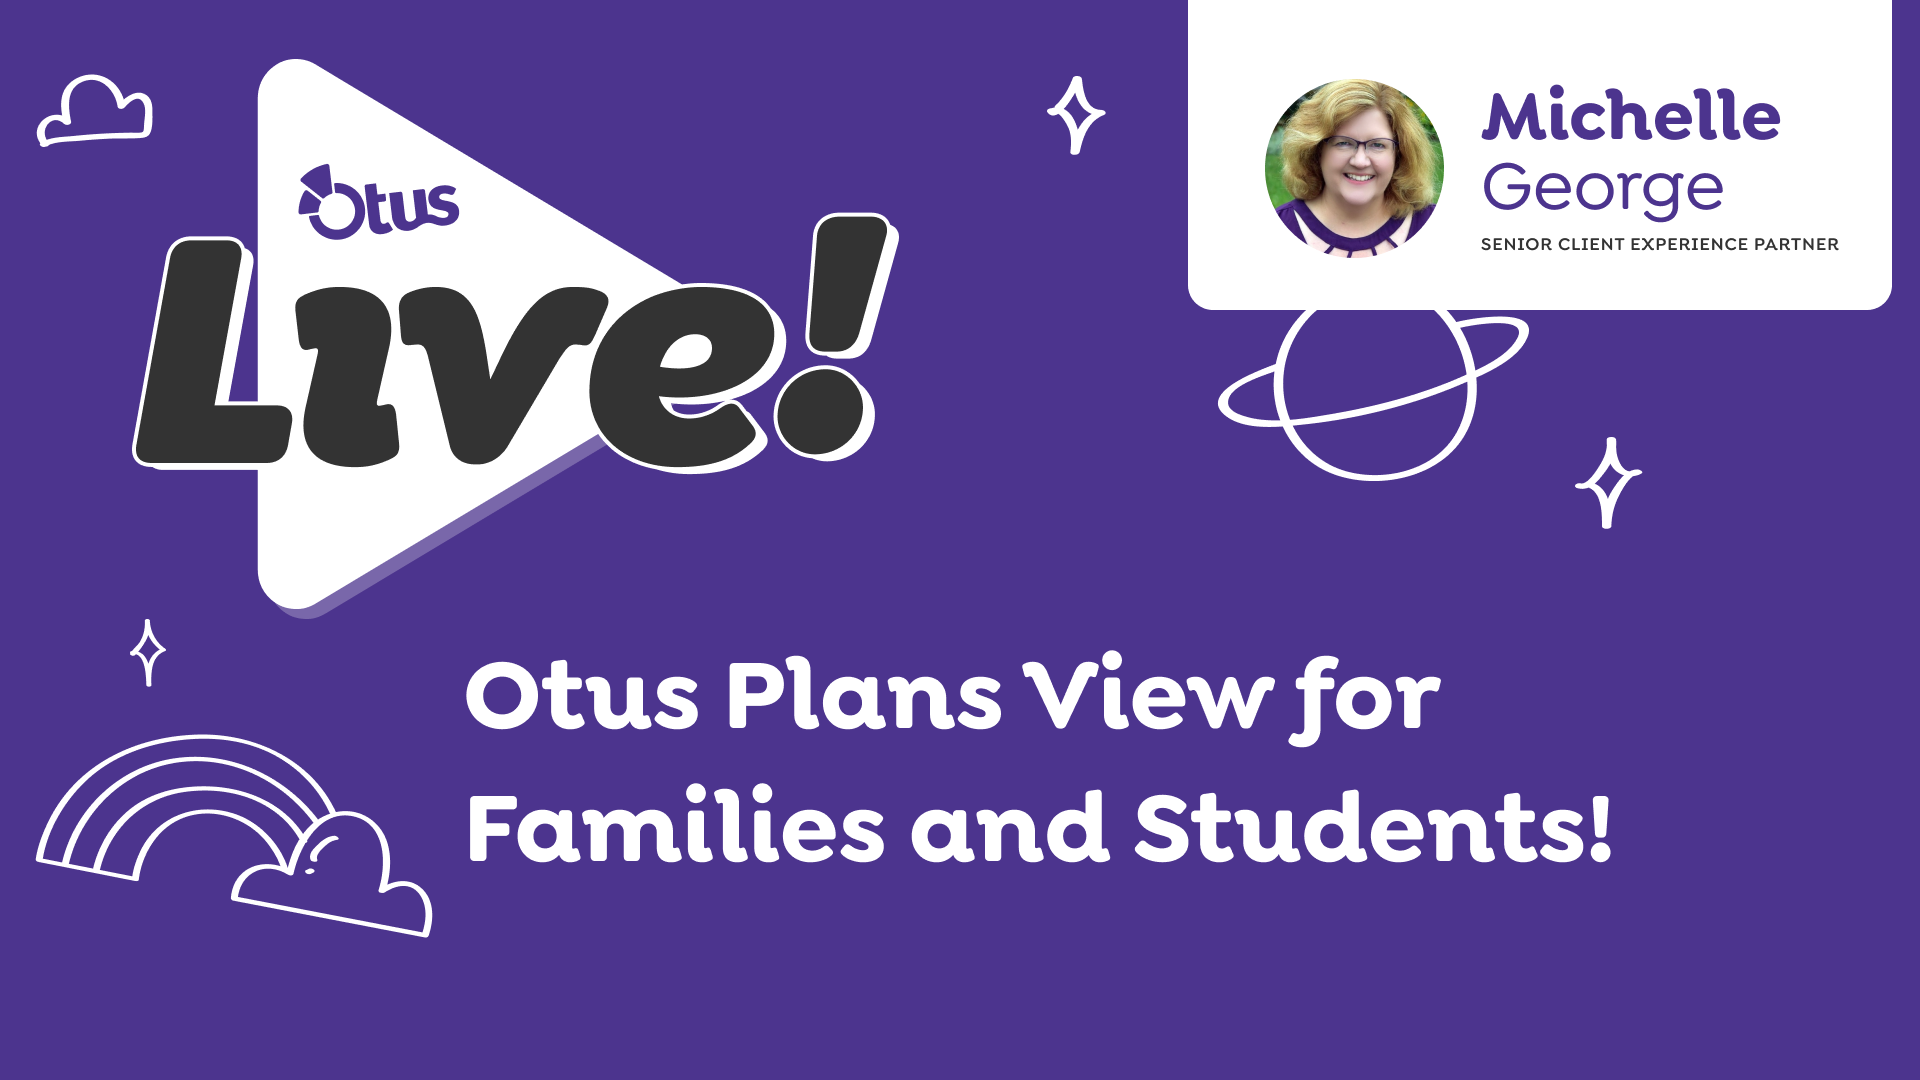 Otus Plans View for Families and Students